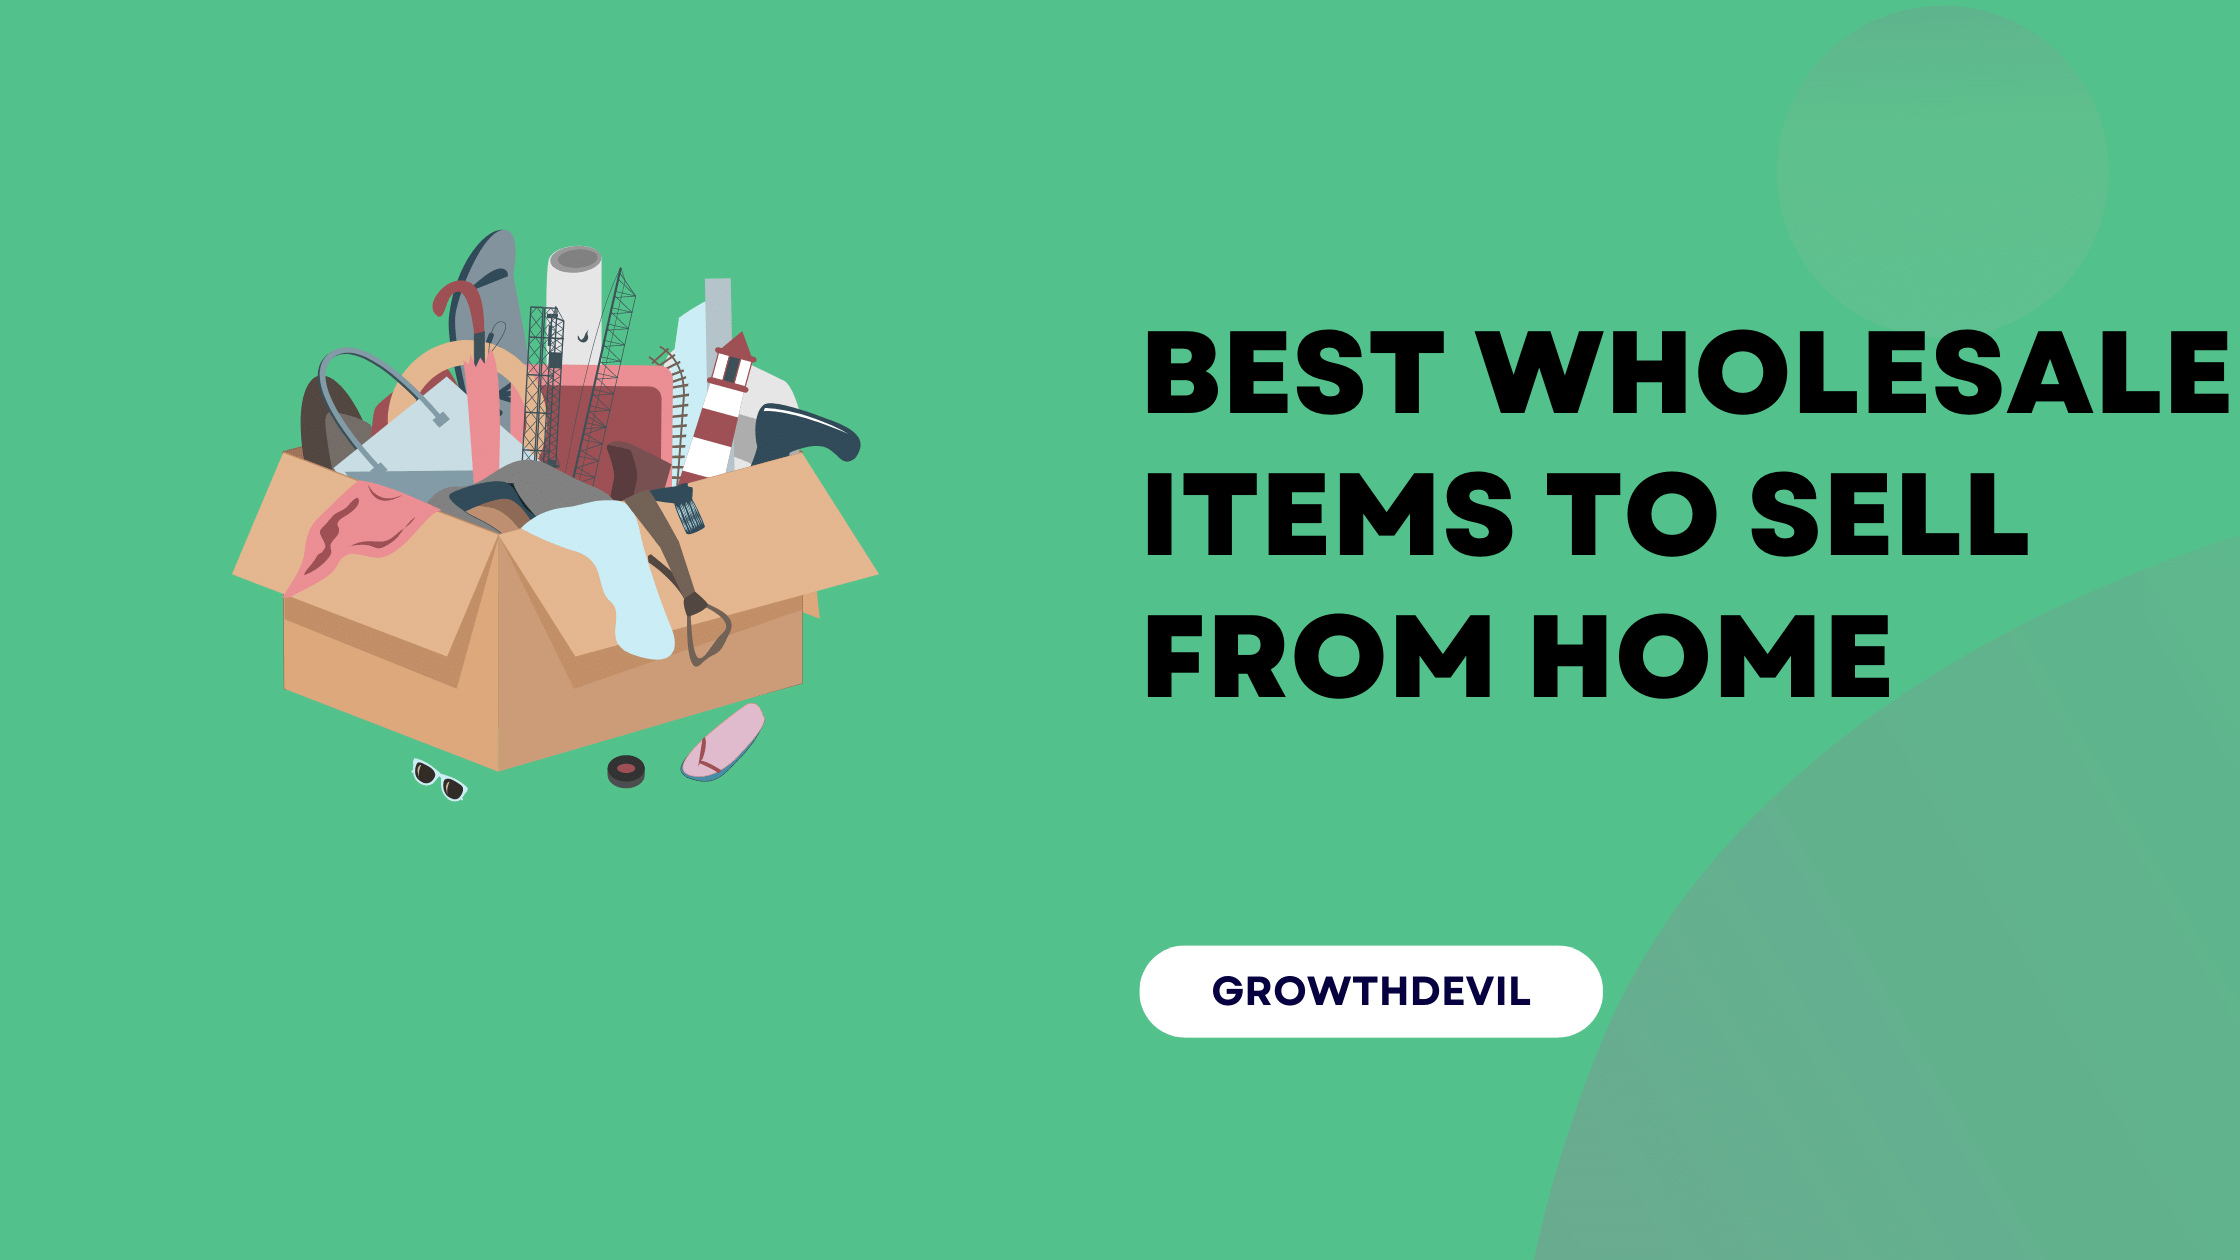 Best Wholesale Items To Sell From Home - GrowthDevil